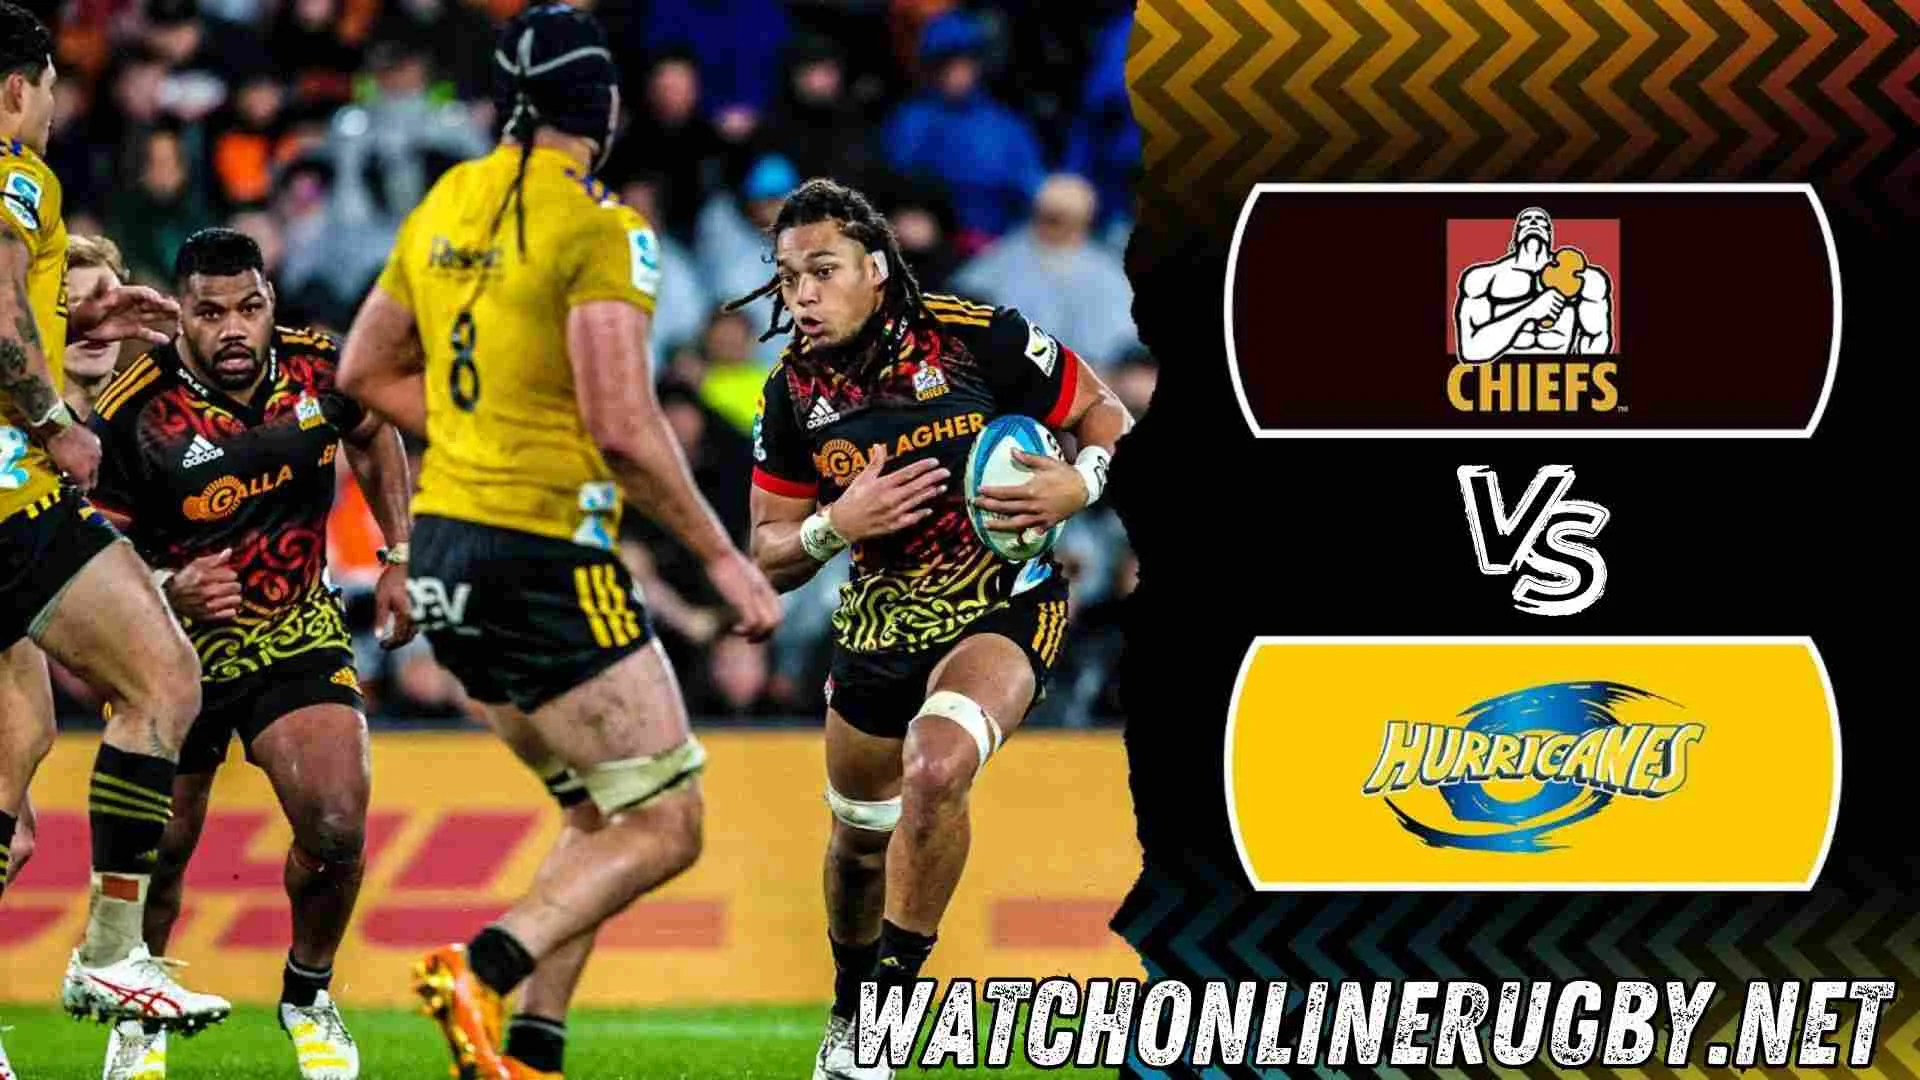 Hurricanes VS Chiefs Rugby Live